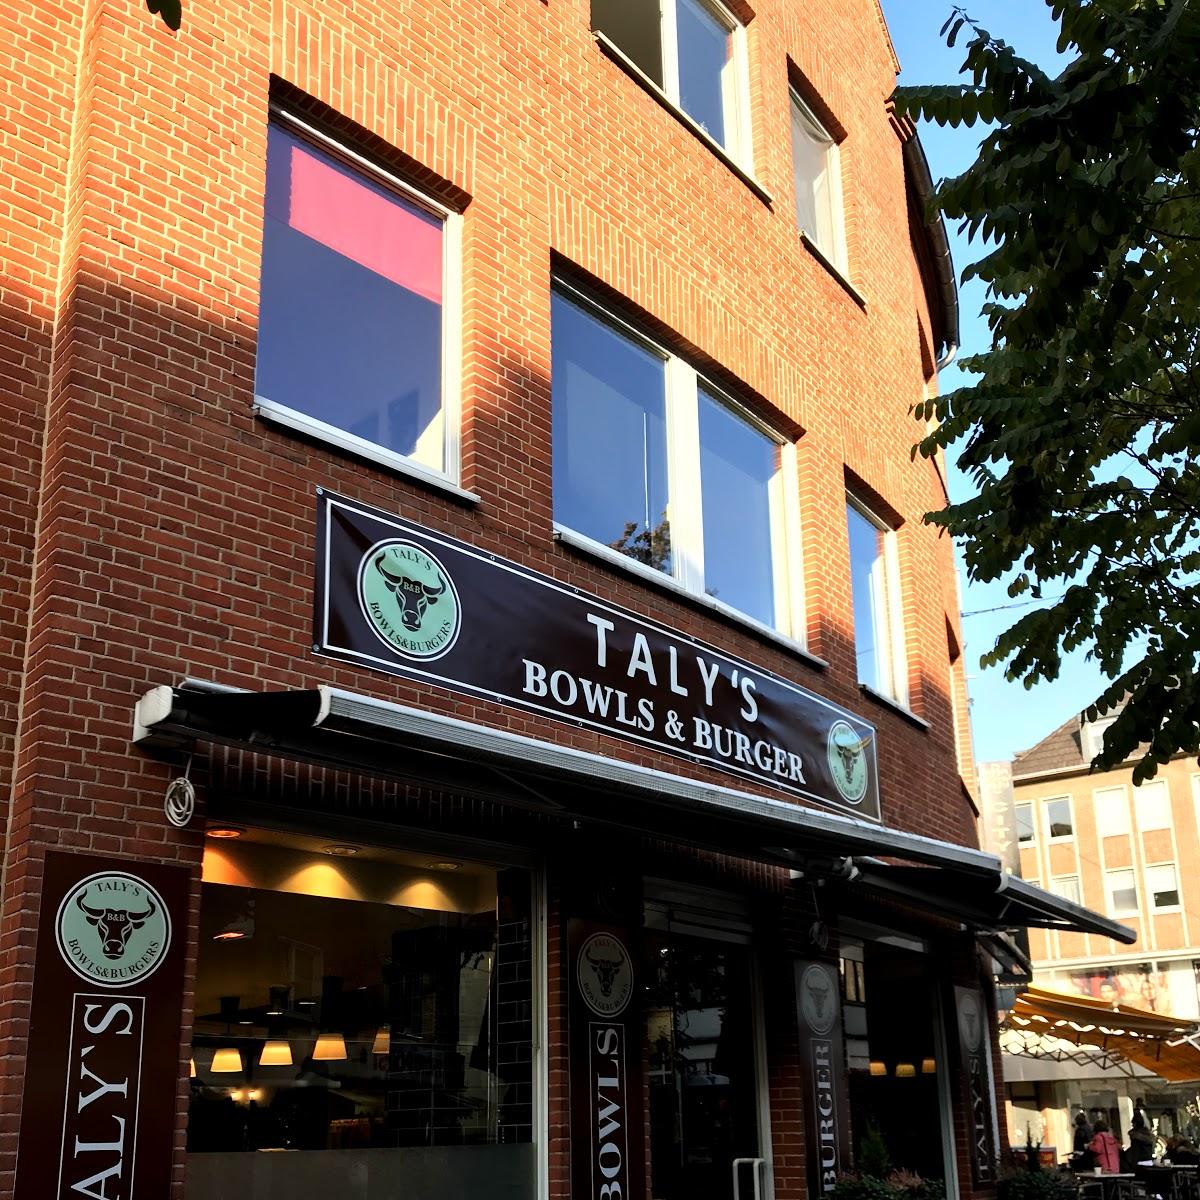 Restaurant "TALY’S BOWLS & BURGERS" in Kleve